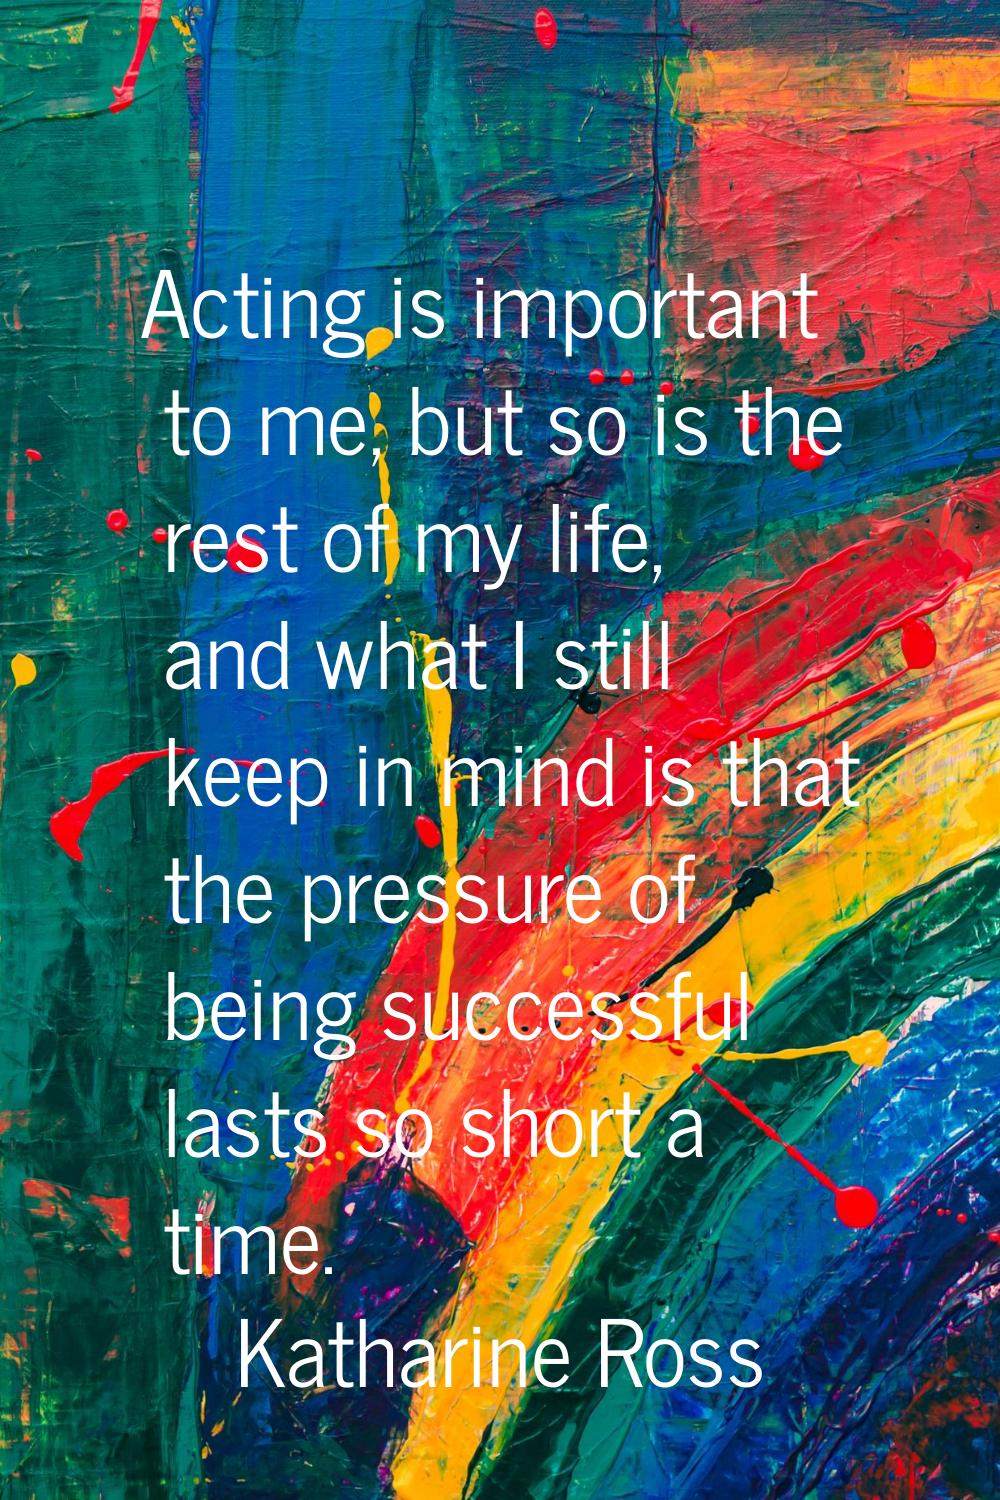 Acting is important to me, but so is the rest of my life, and what I still keep in mind is that the